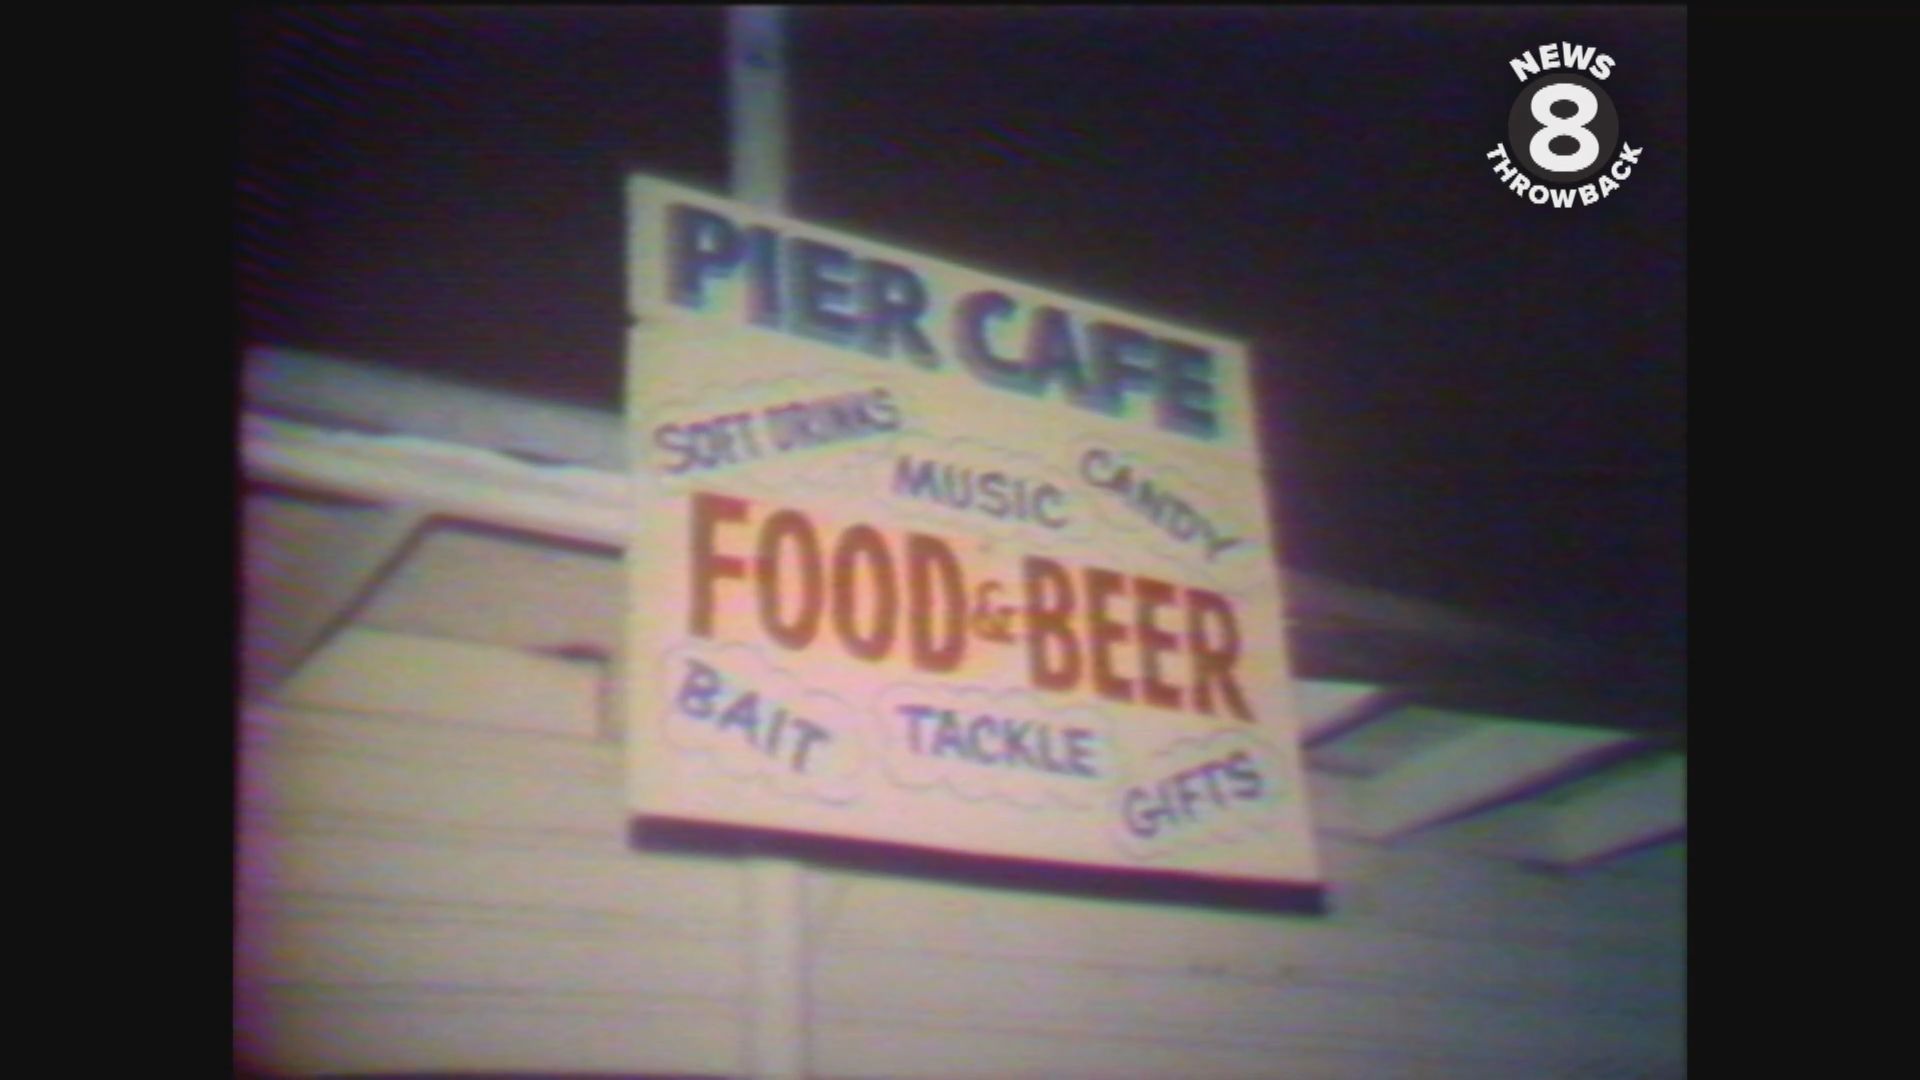 December 21, 1976 Thirty year old Pier Cafe was destroyed by fire.